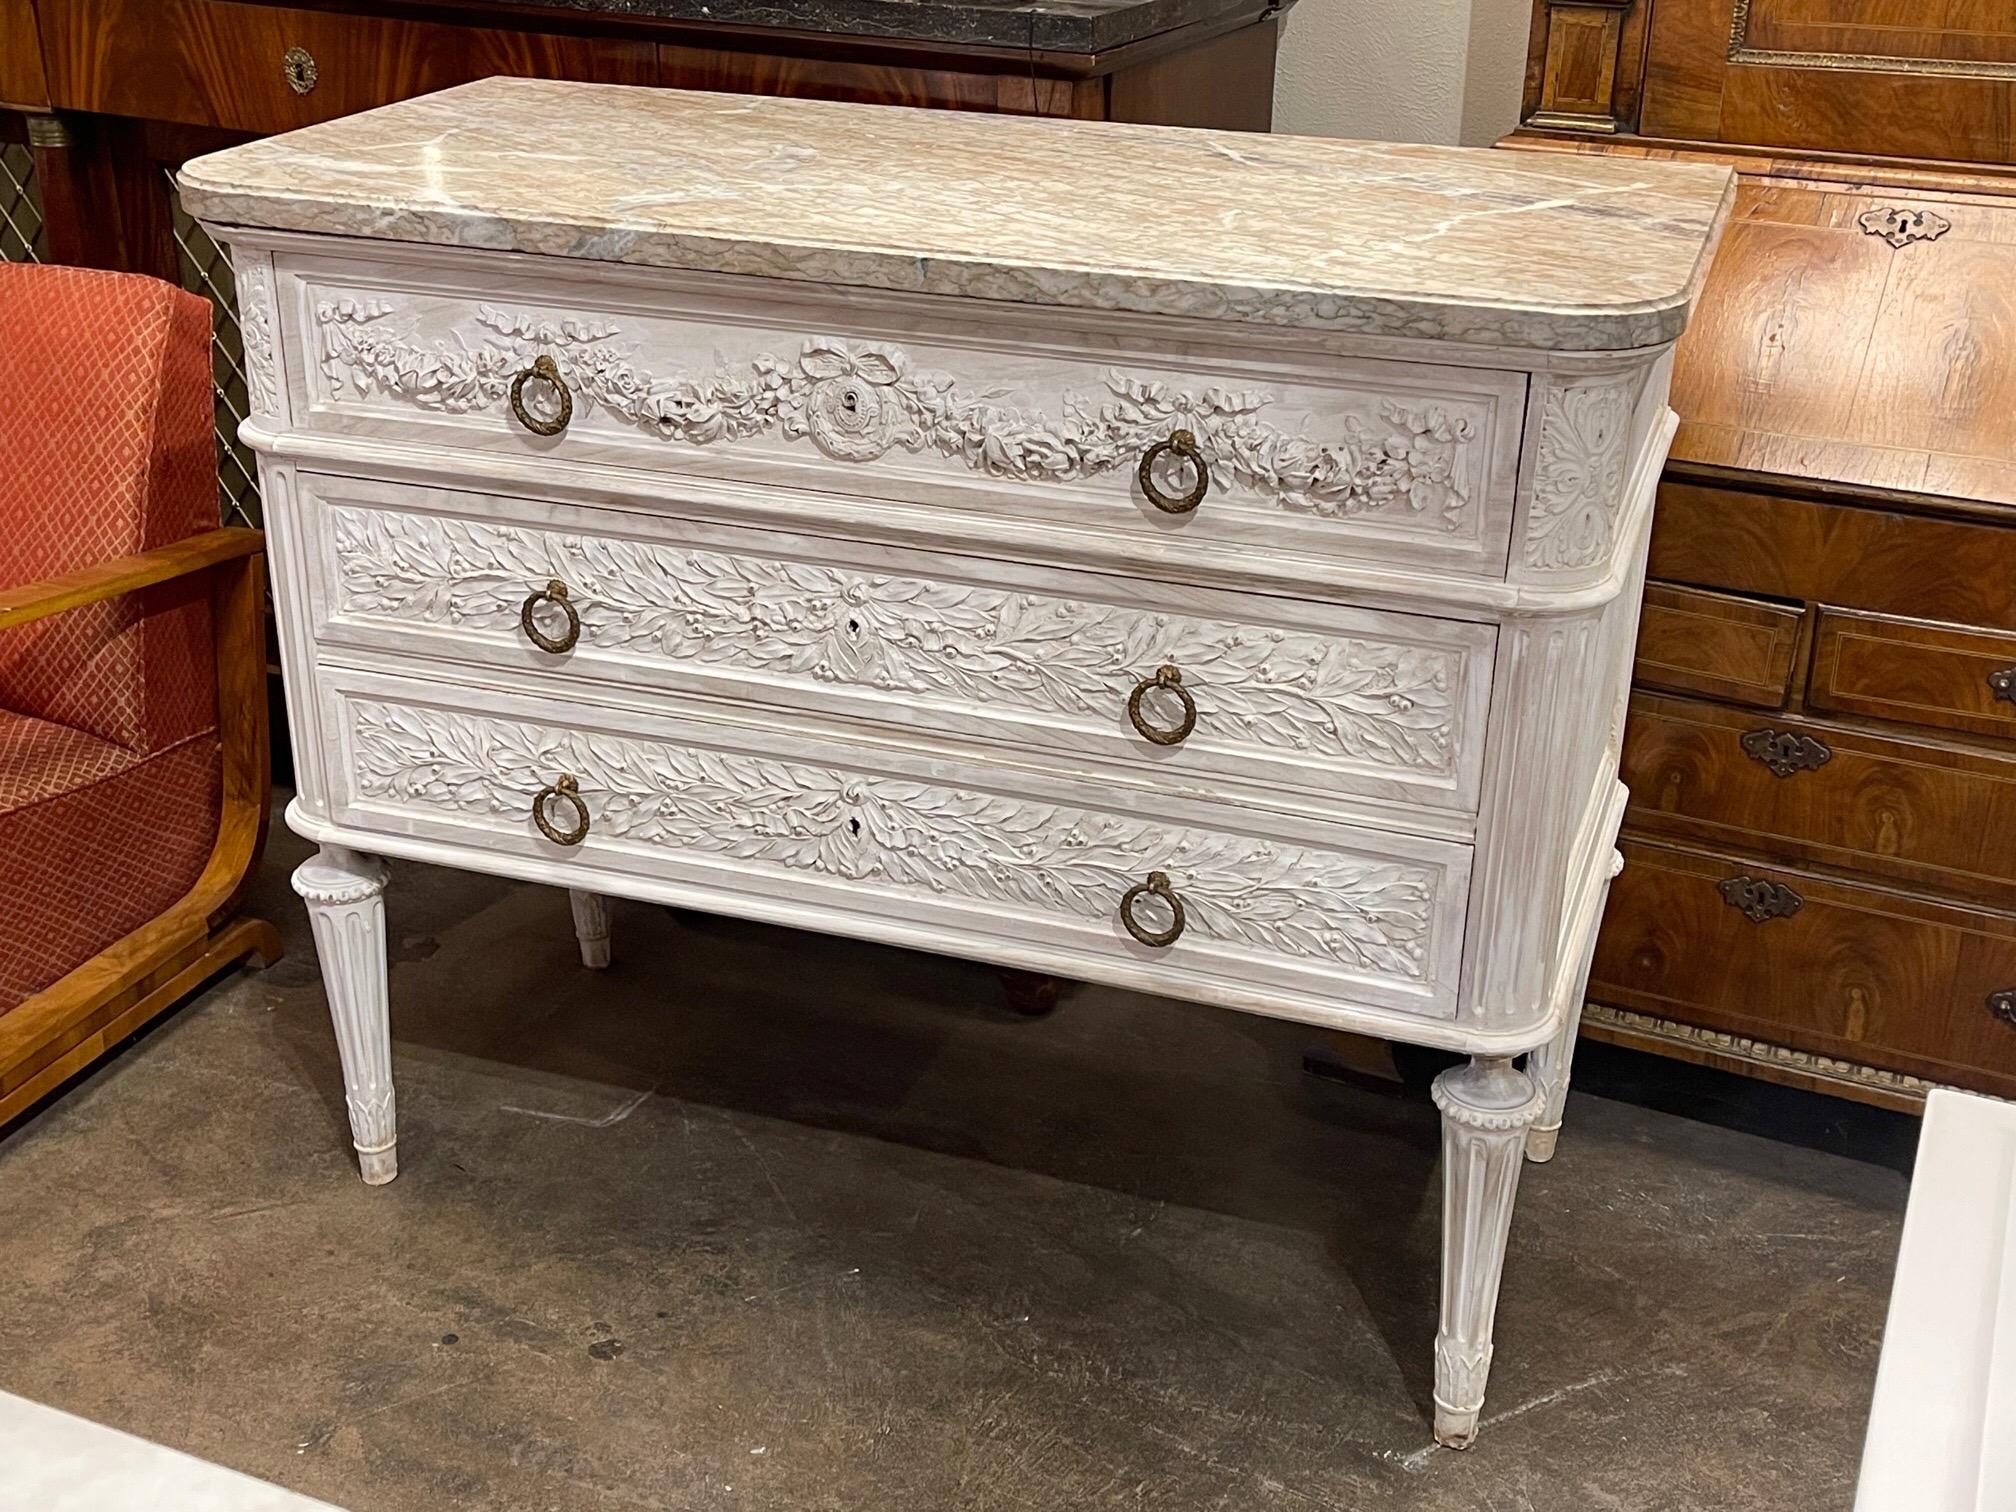 Very fine 19th century carved and white washed walnut commode. Beautiful intricate carvings on this substantial piece and three drawers for storage. Gorgeous!